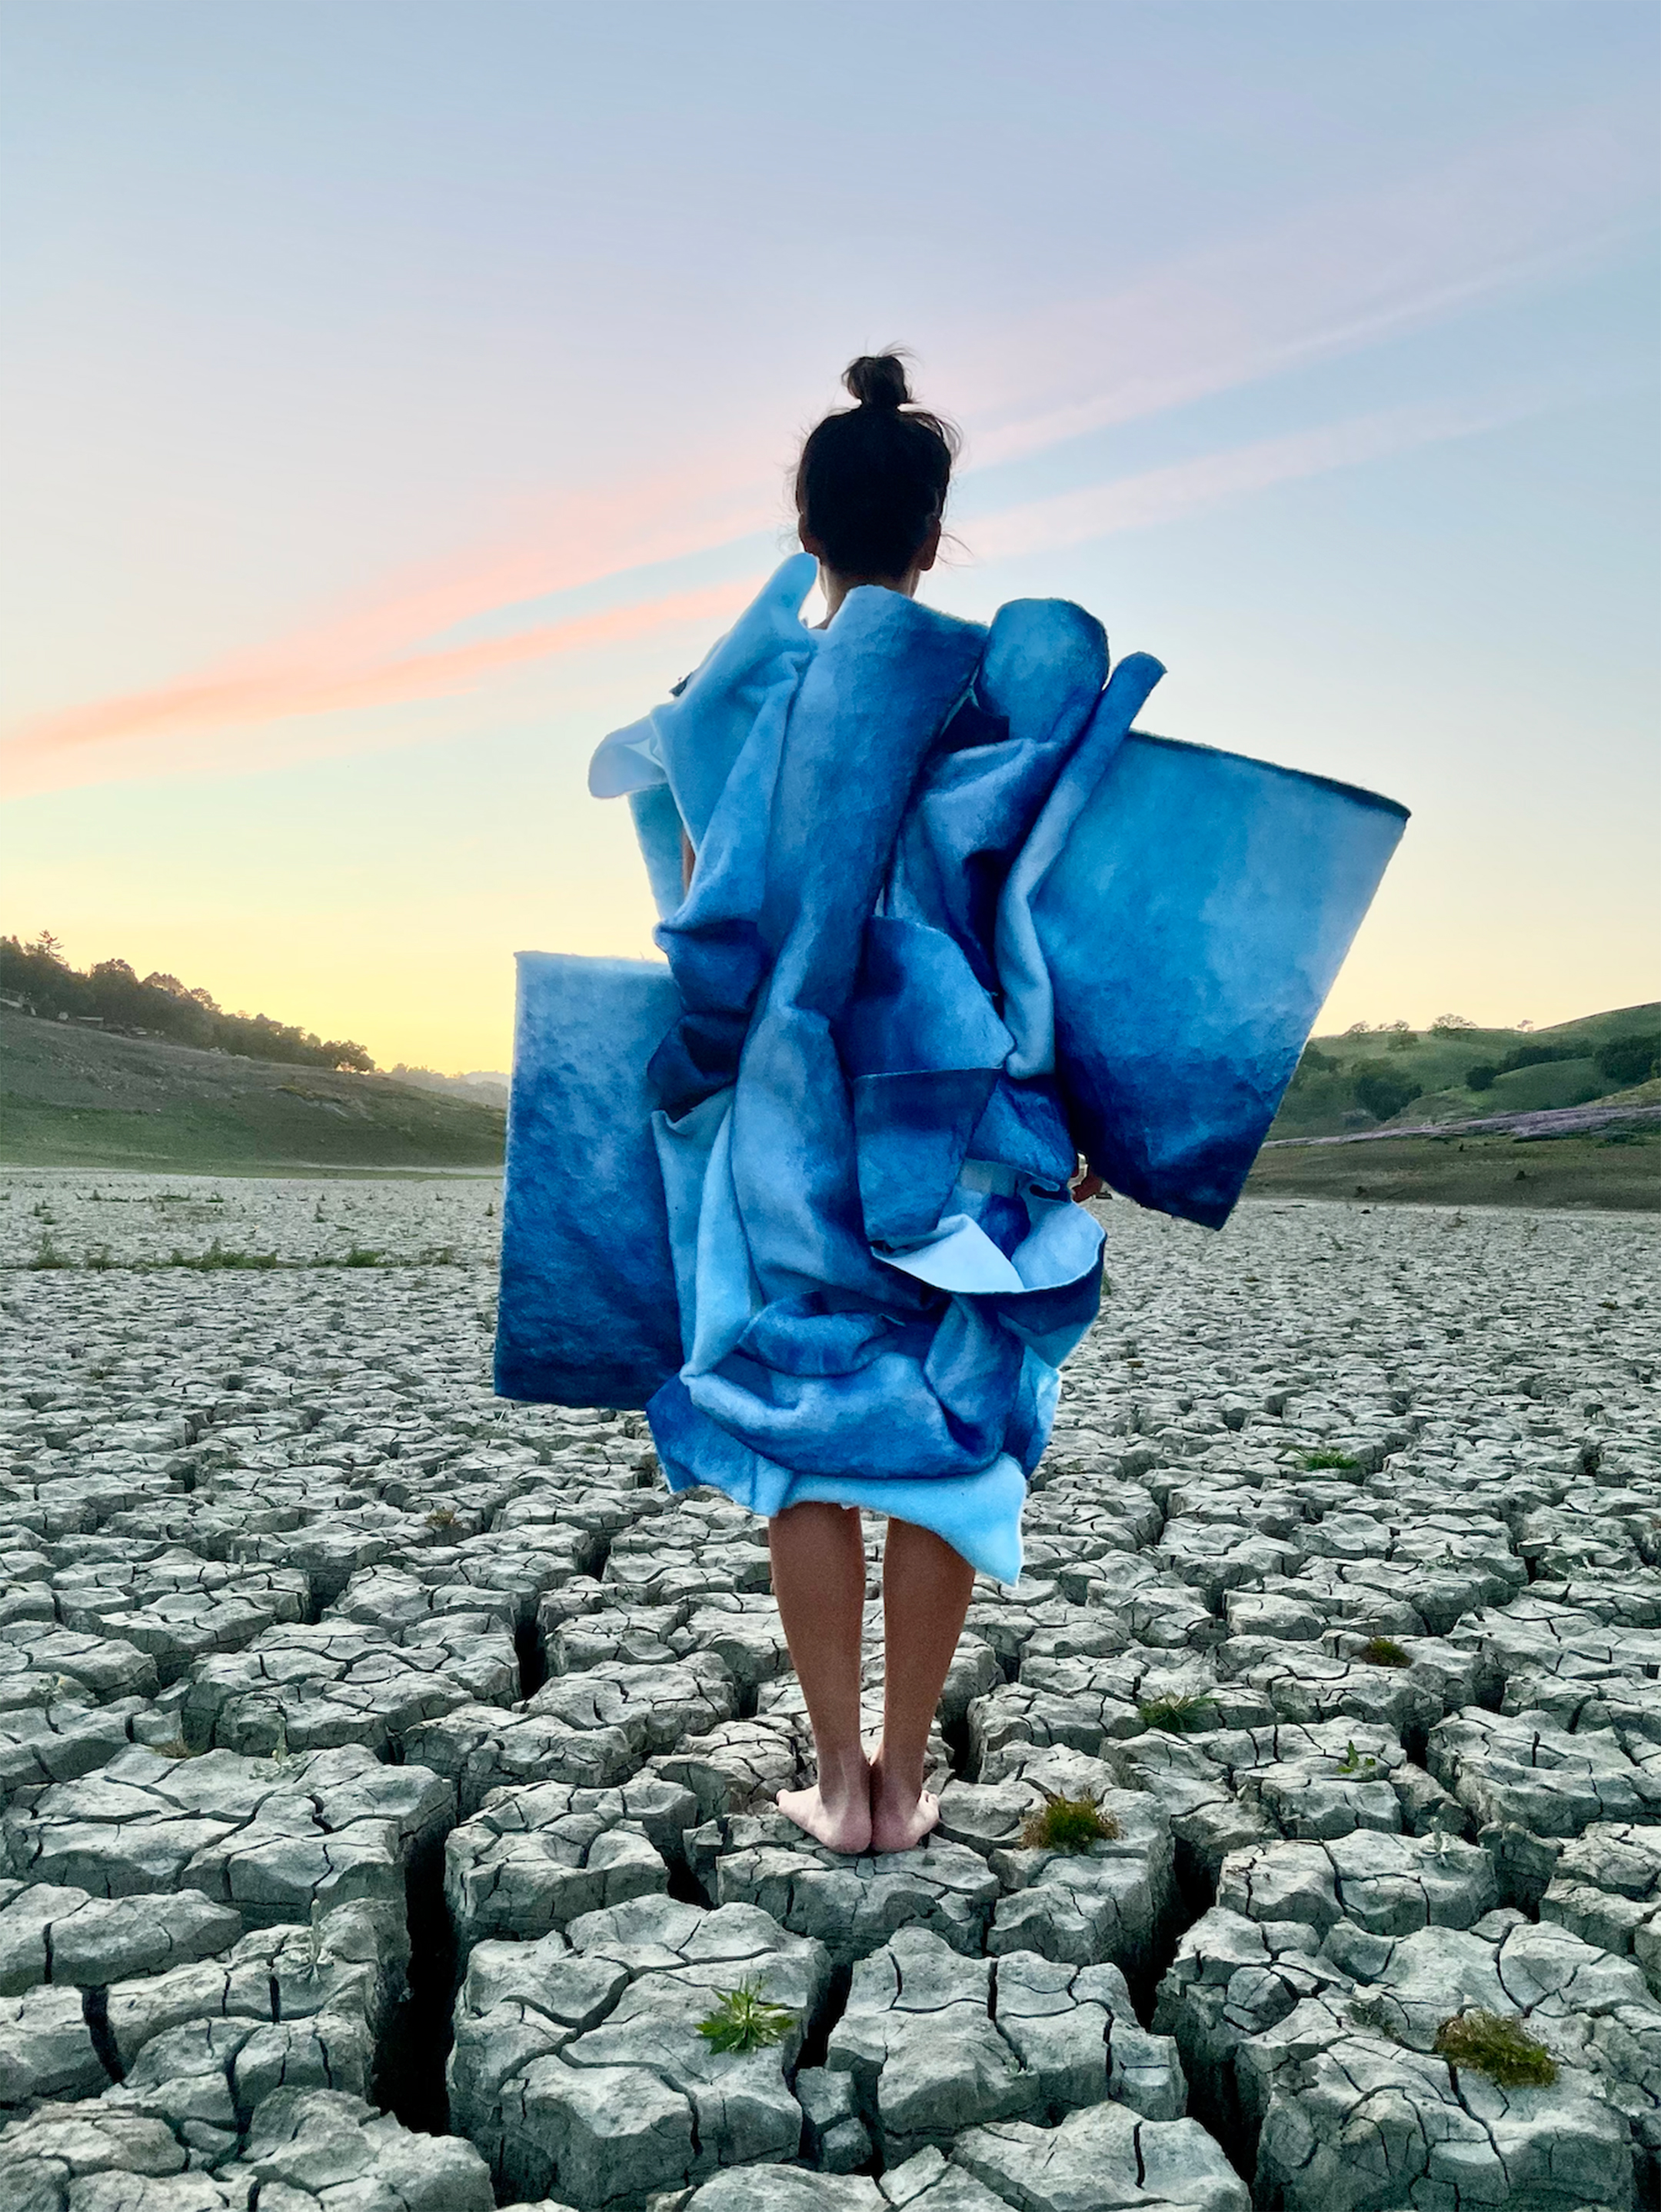 Photo of a woman, seen from behind, wearing a blue costume while standing on a parched ground at sunset